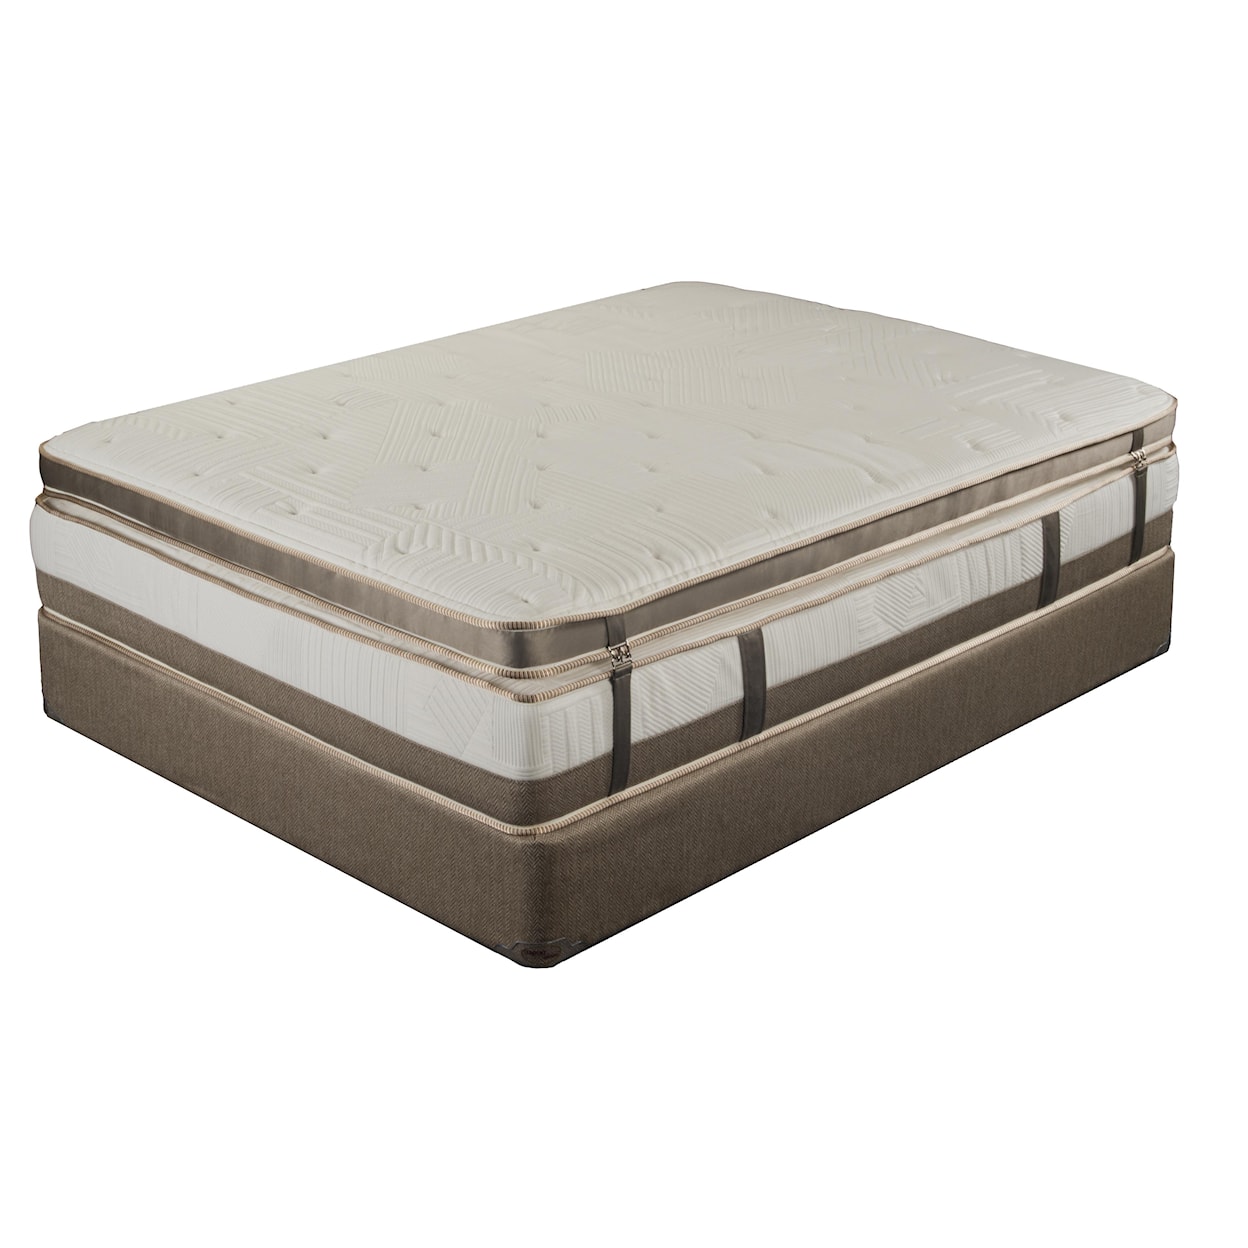 King Koil Extended Life 3300 Twin Mattress Set with Removable Top Layer